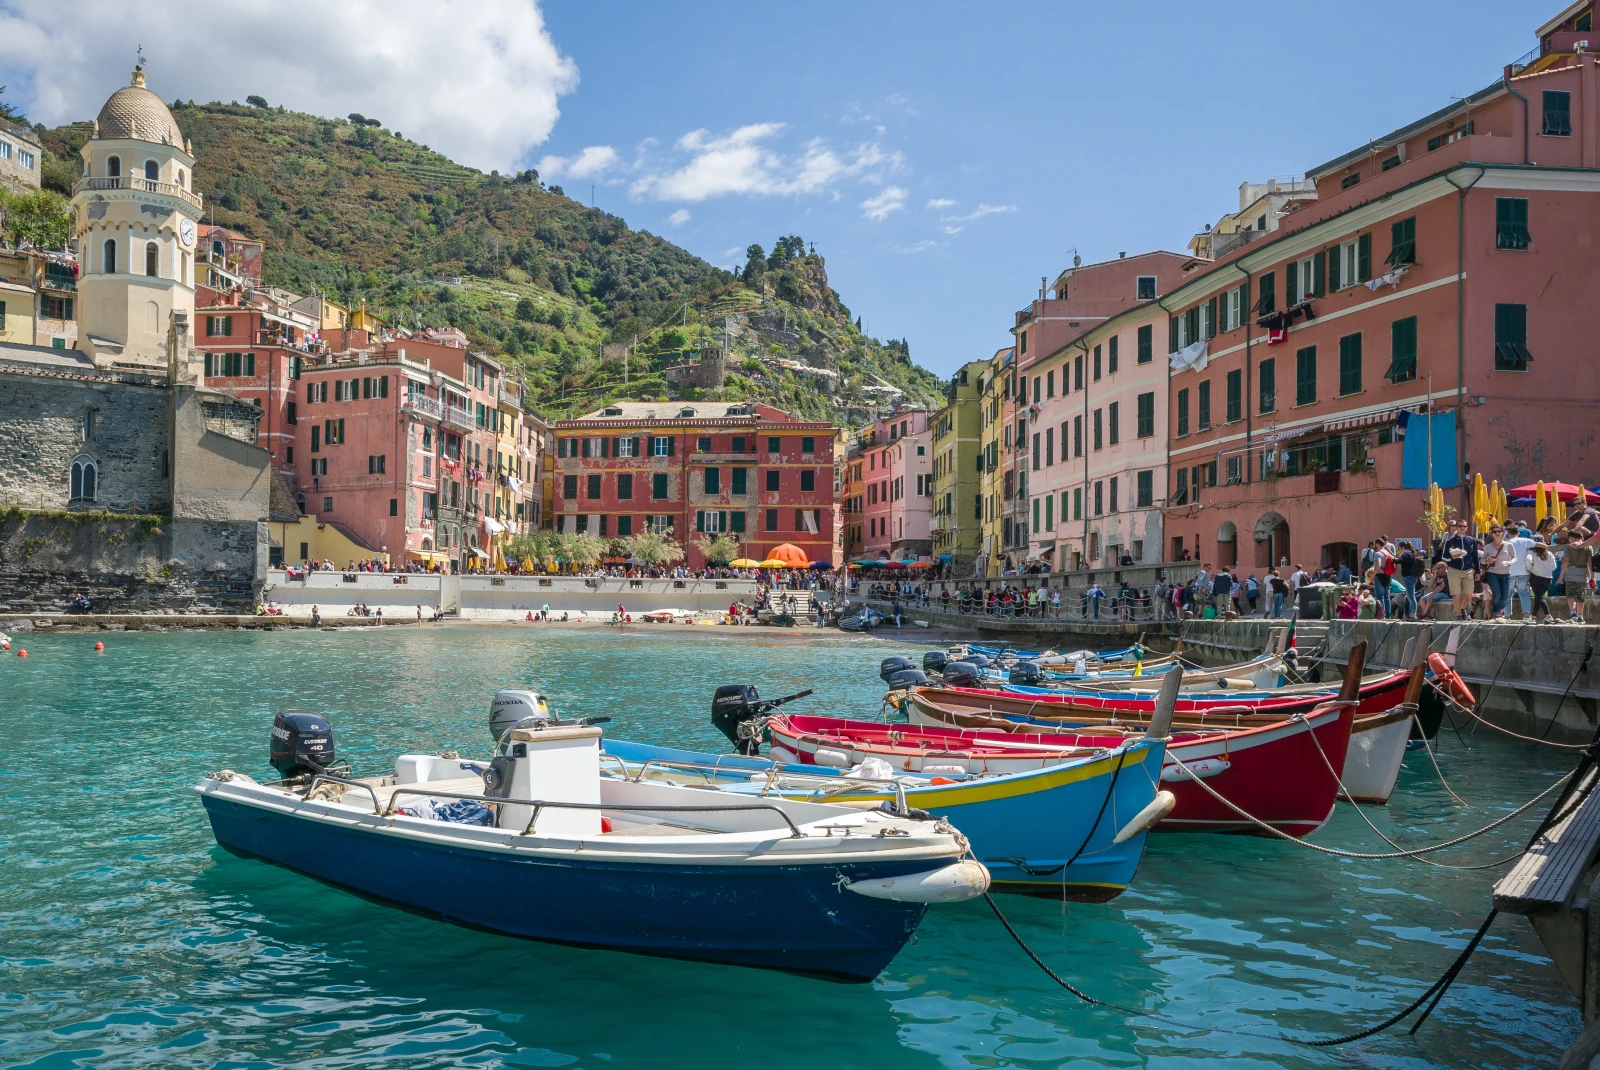 Colorful boats in water in Cinque Terre.